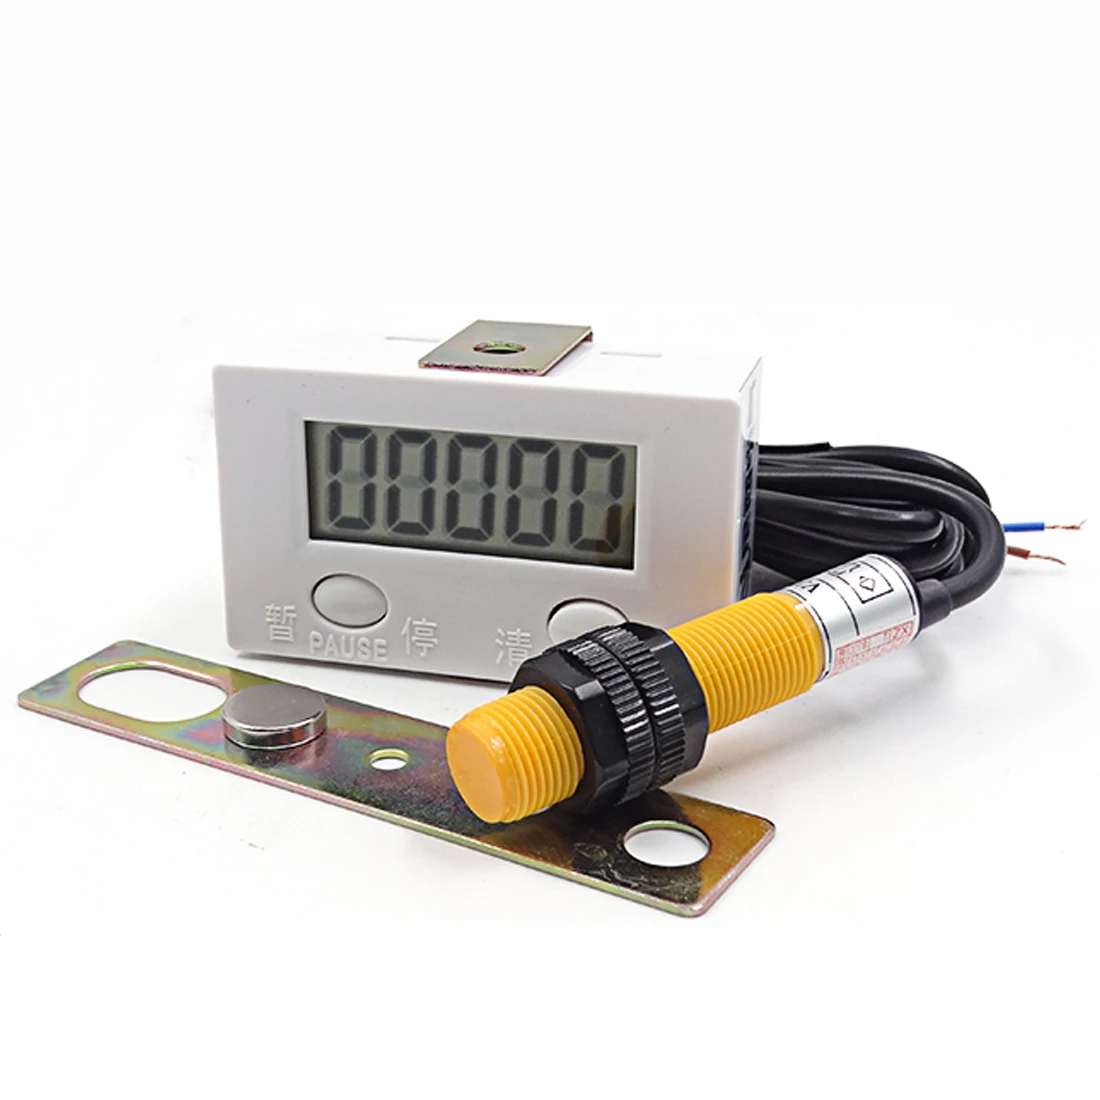 

LCD Digital Display 5 Digit Electronic Counter Punch Magnetic Induction Proximity Switch Reciprocating Rotary Counter